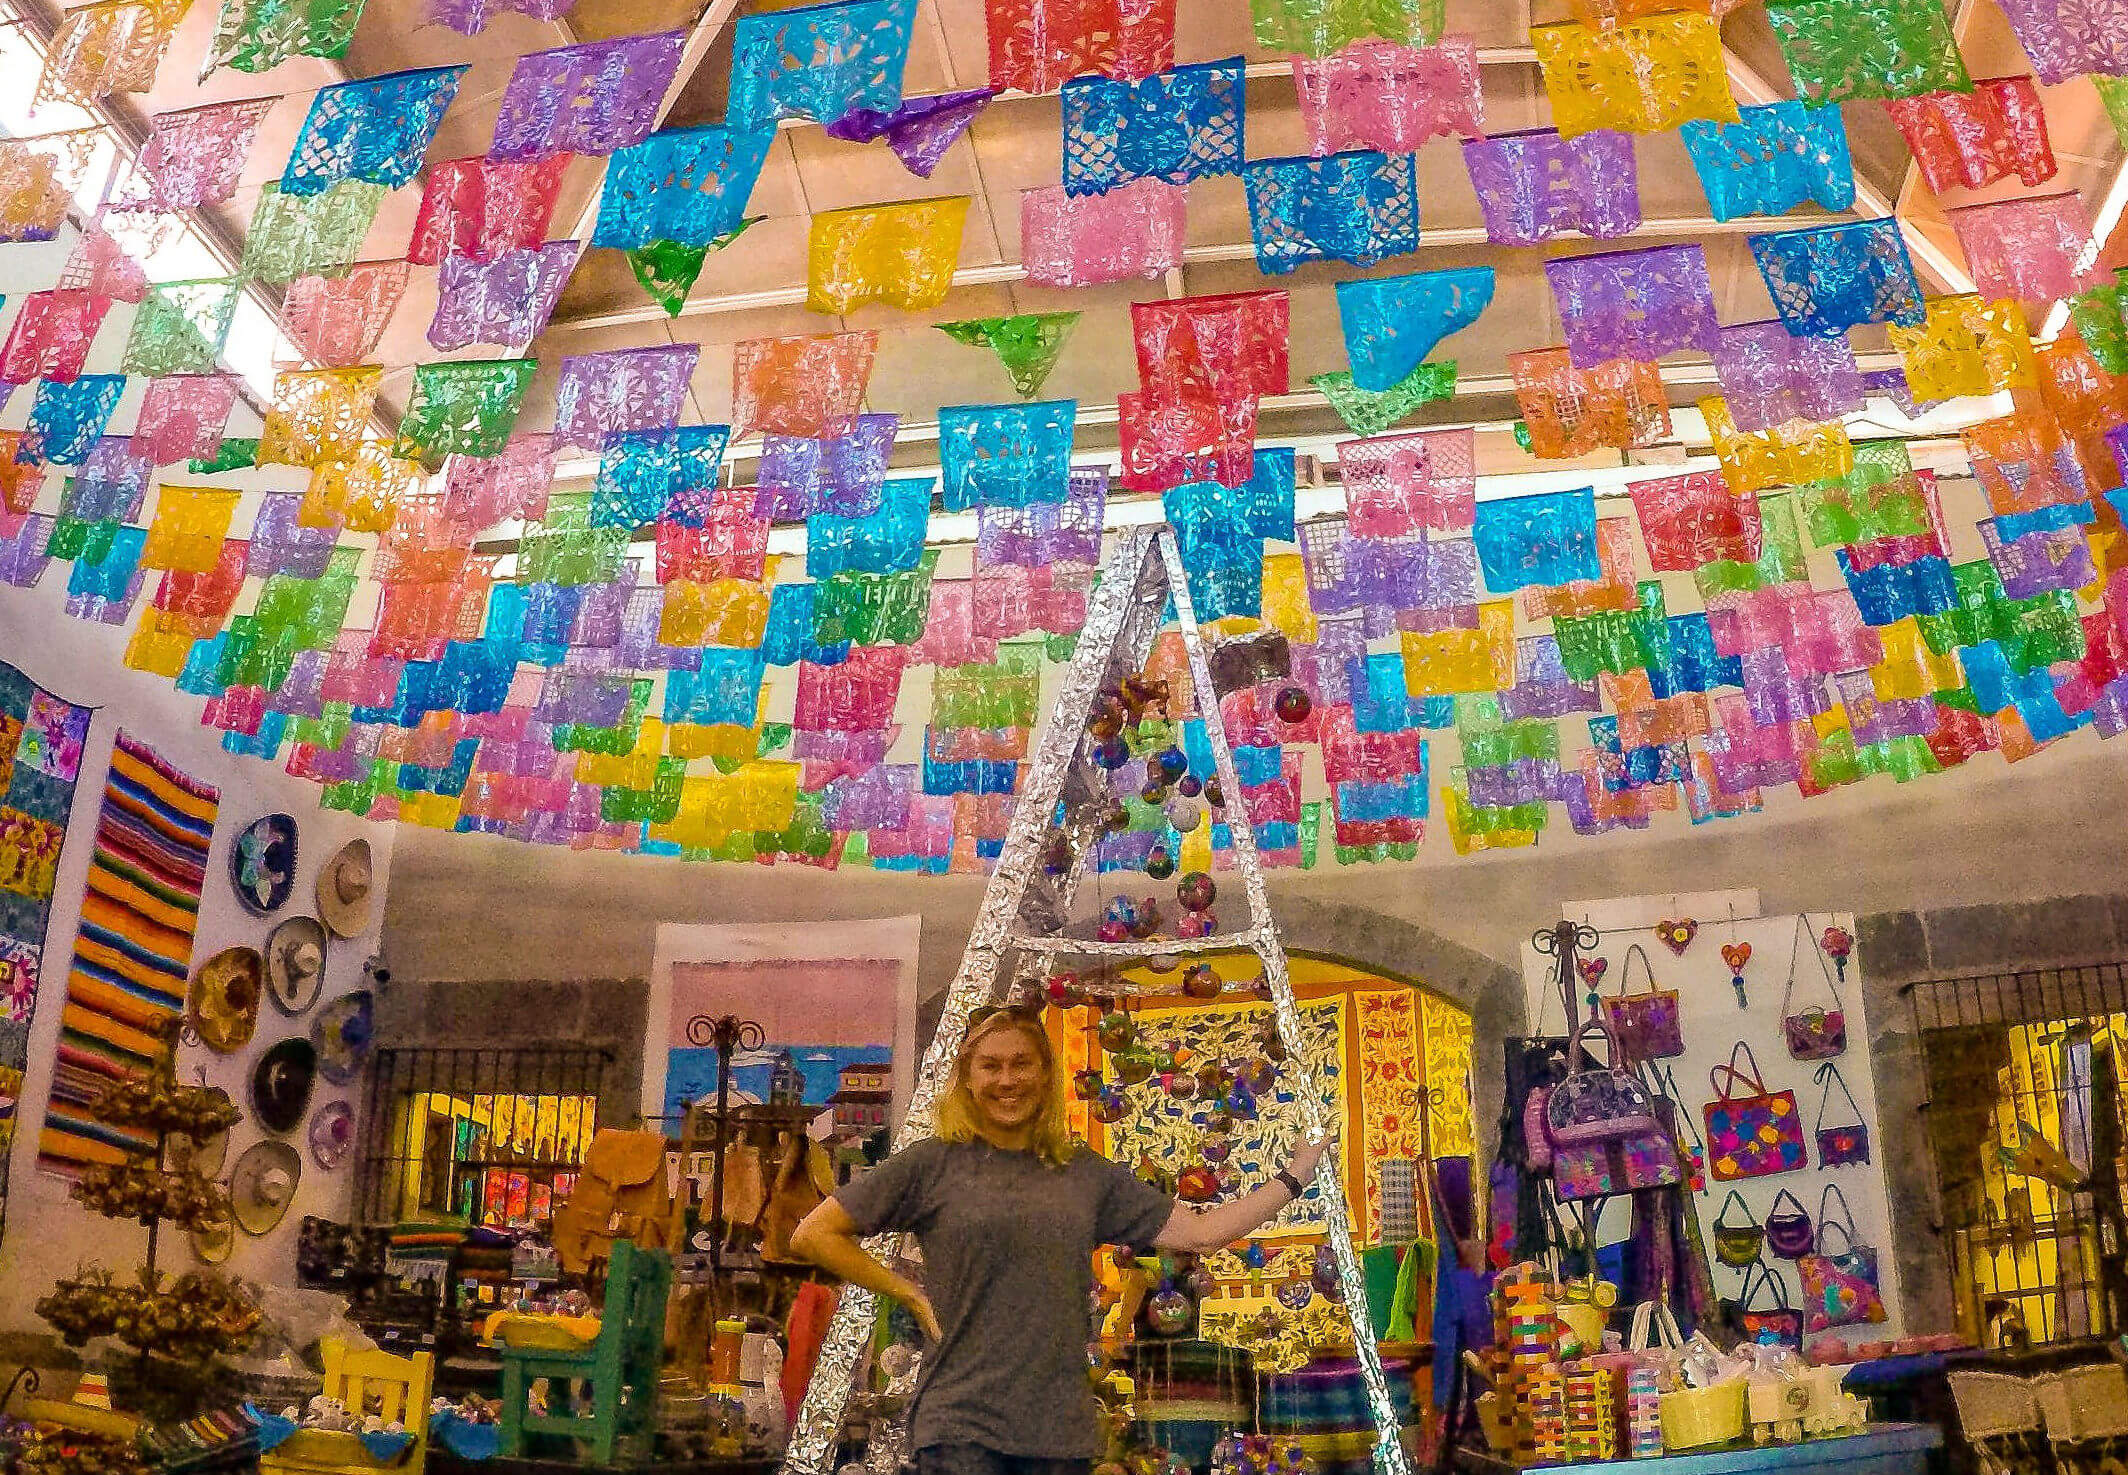 Papel picado punched paper in Tlaquepaque Jalisco with Allison Nevins.